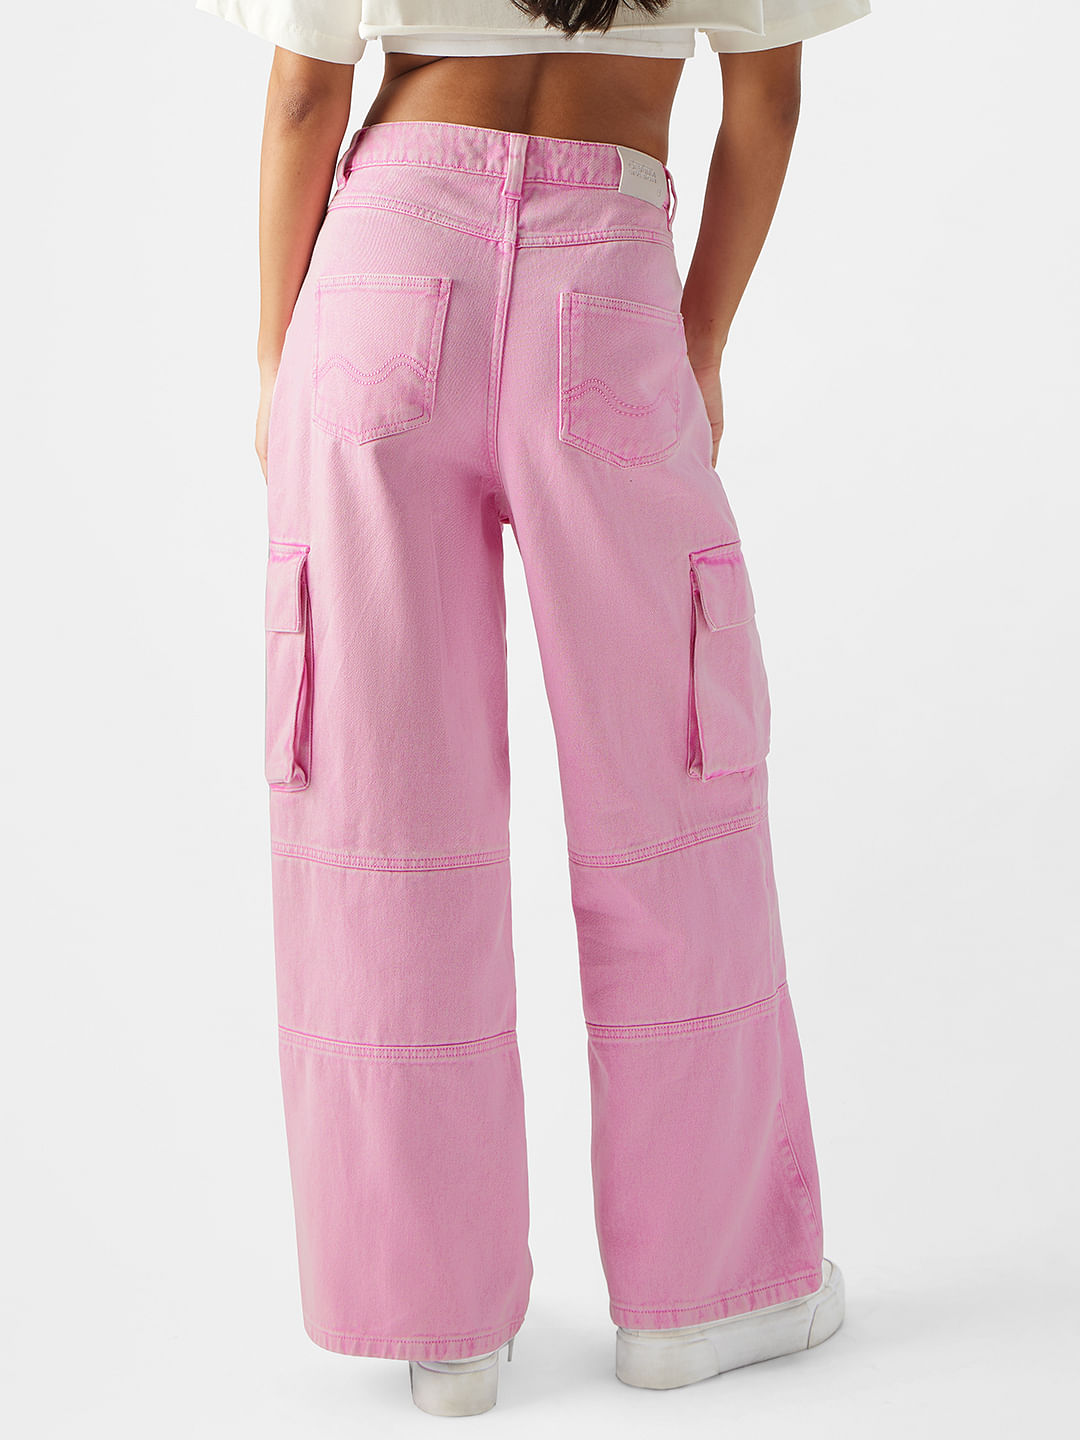 Buy Solids: Sangria Pink (Wide leg fit) Womens Jeans Online.